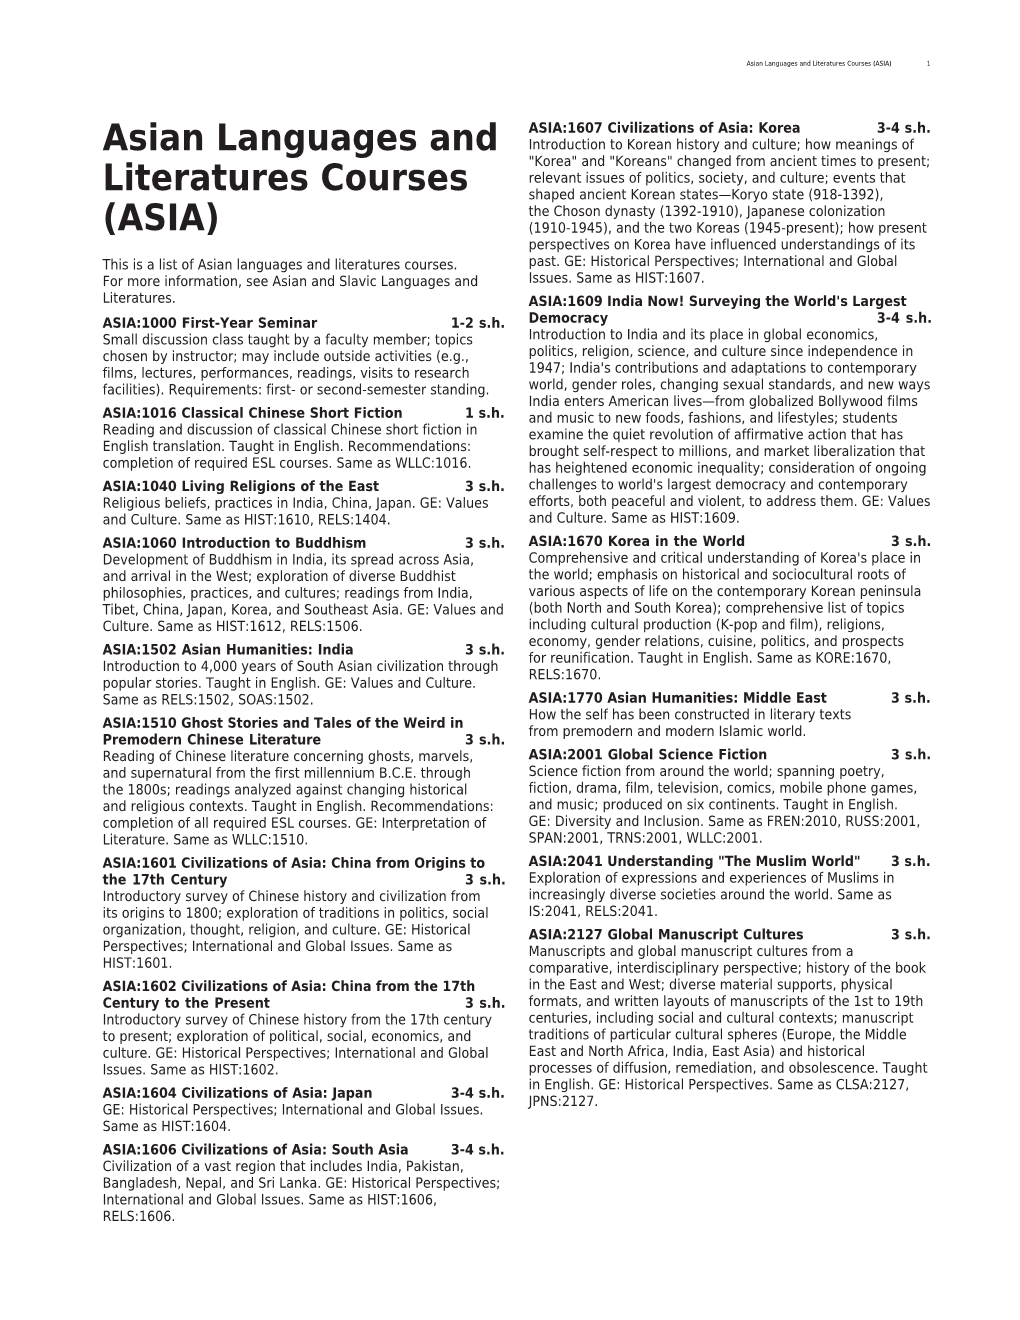 Asian Languages and Literatures Courses (ASIA) 1